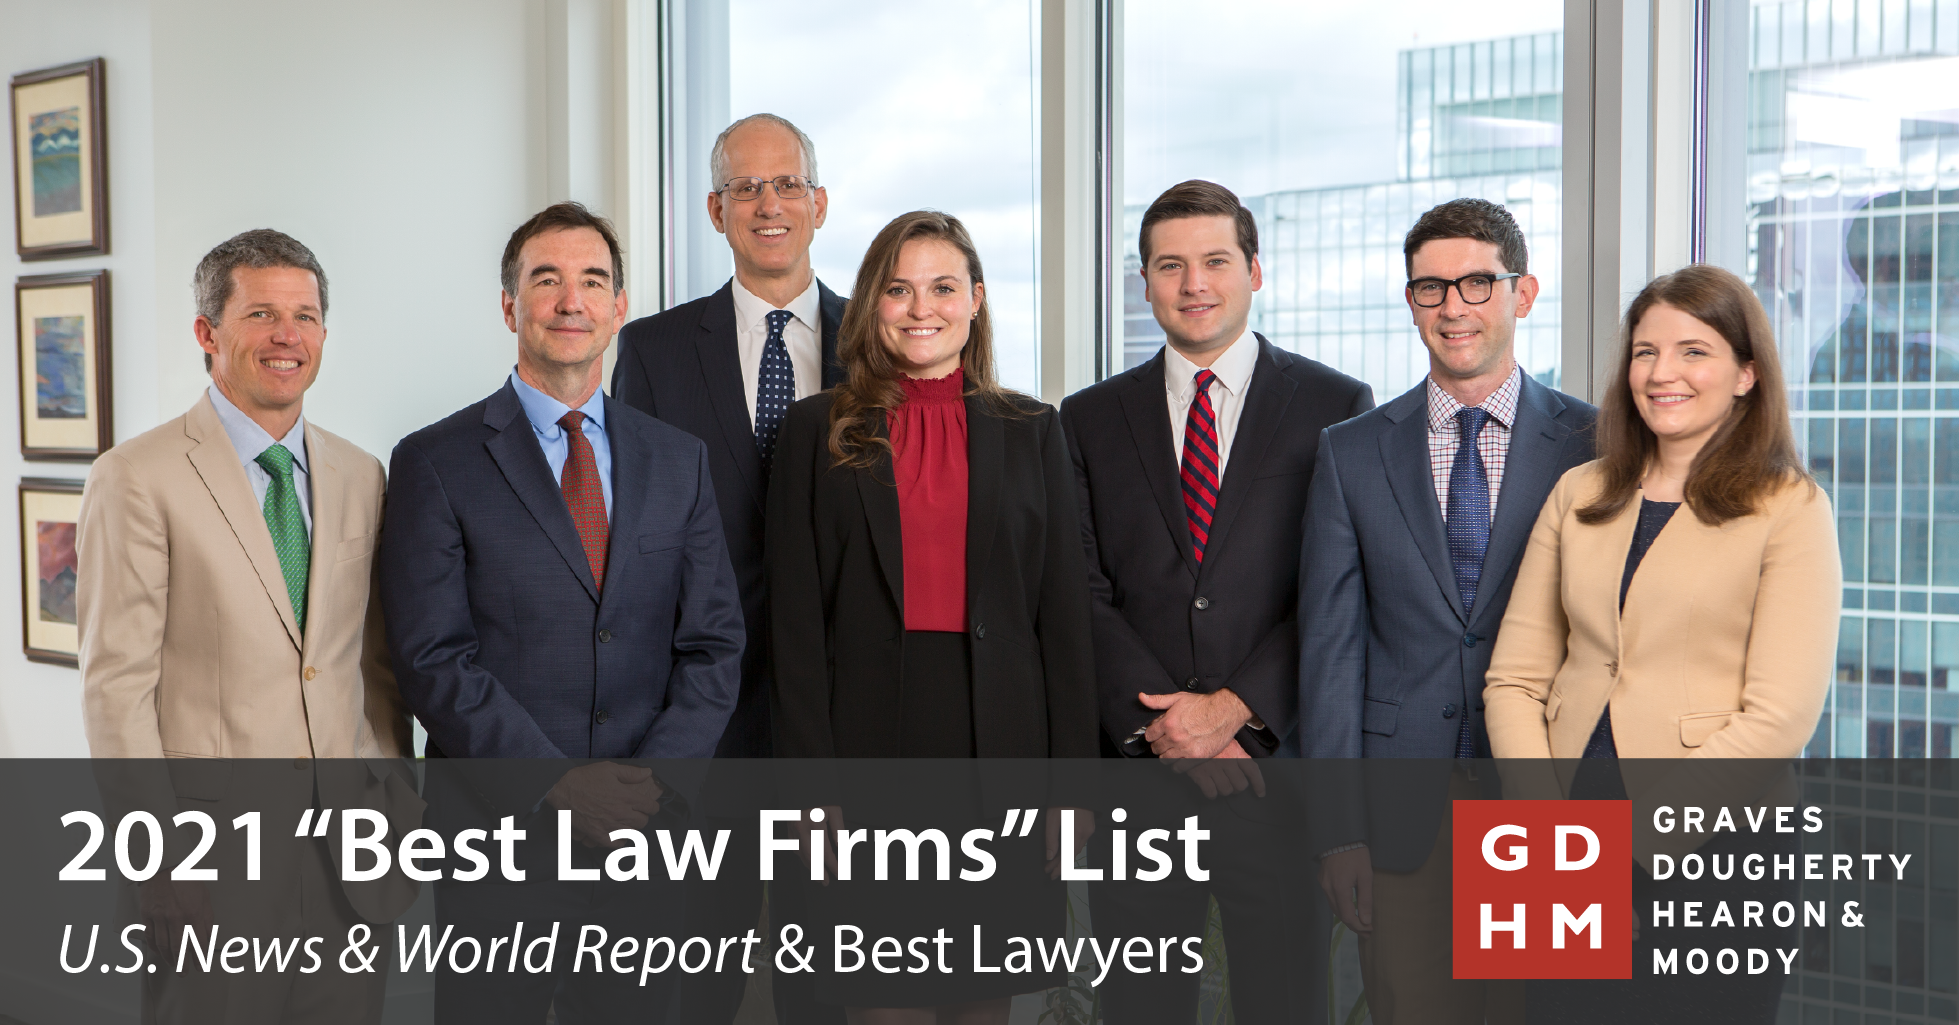 Graves Dougherty Earns Top Rankings on Best Law Firms List Graves